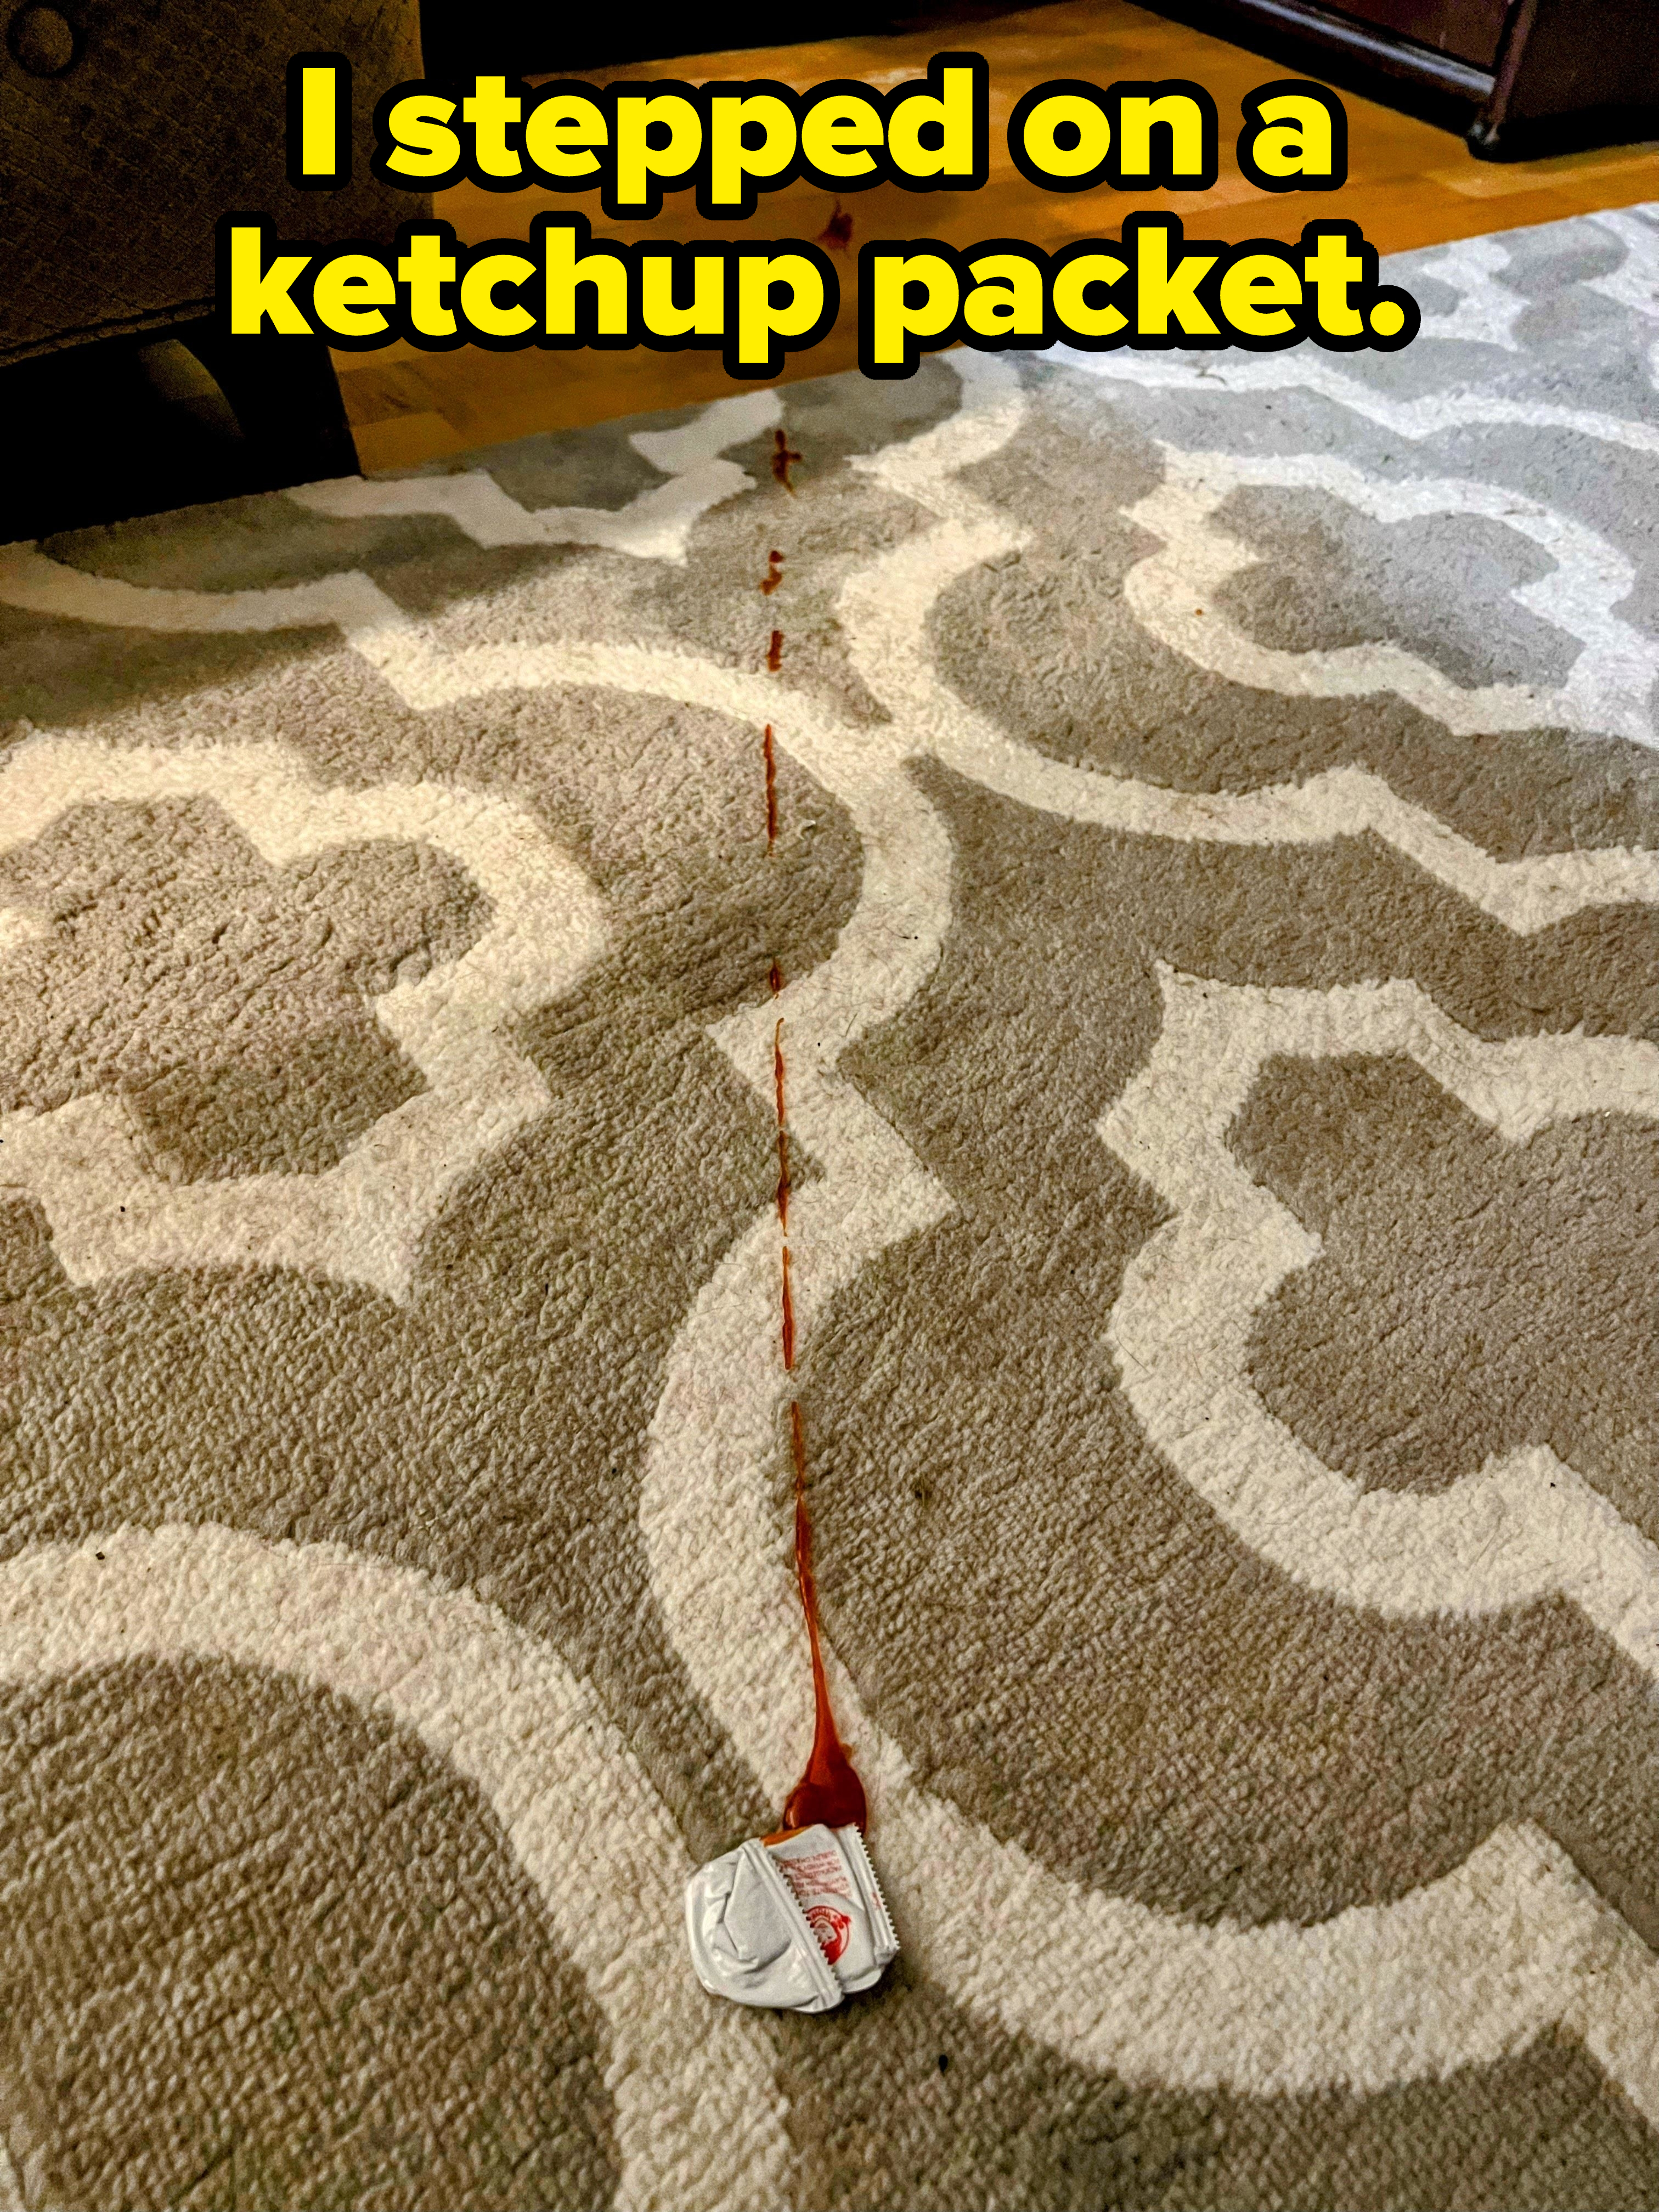 trail of ketchup on the carpet